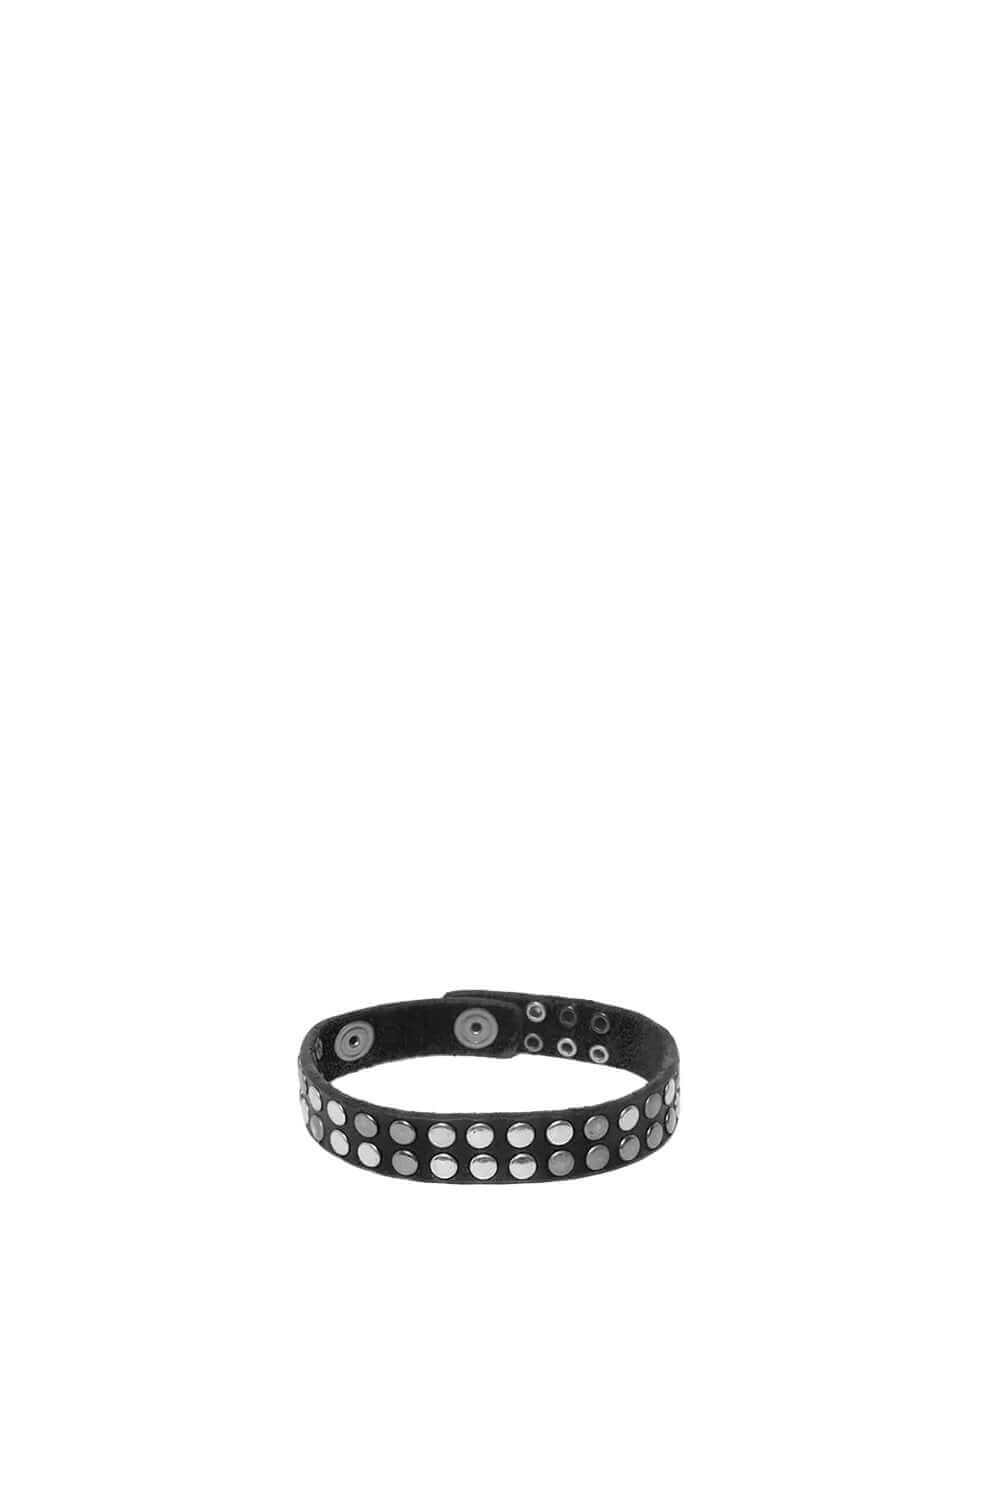 10.000 MINI BR Black leather bracelet with double line studs, zamac button closure with carved HTC Los Angeles logo. 100% Made in Italy. HTC LOS ANGELES